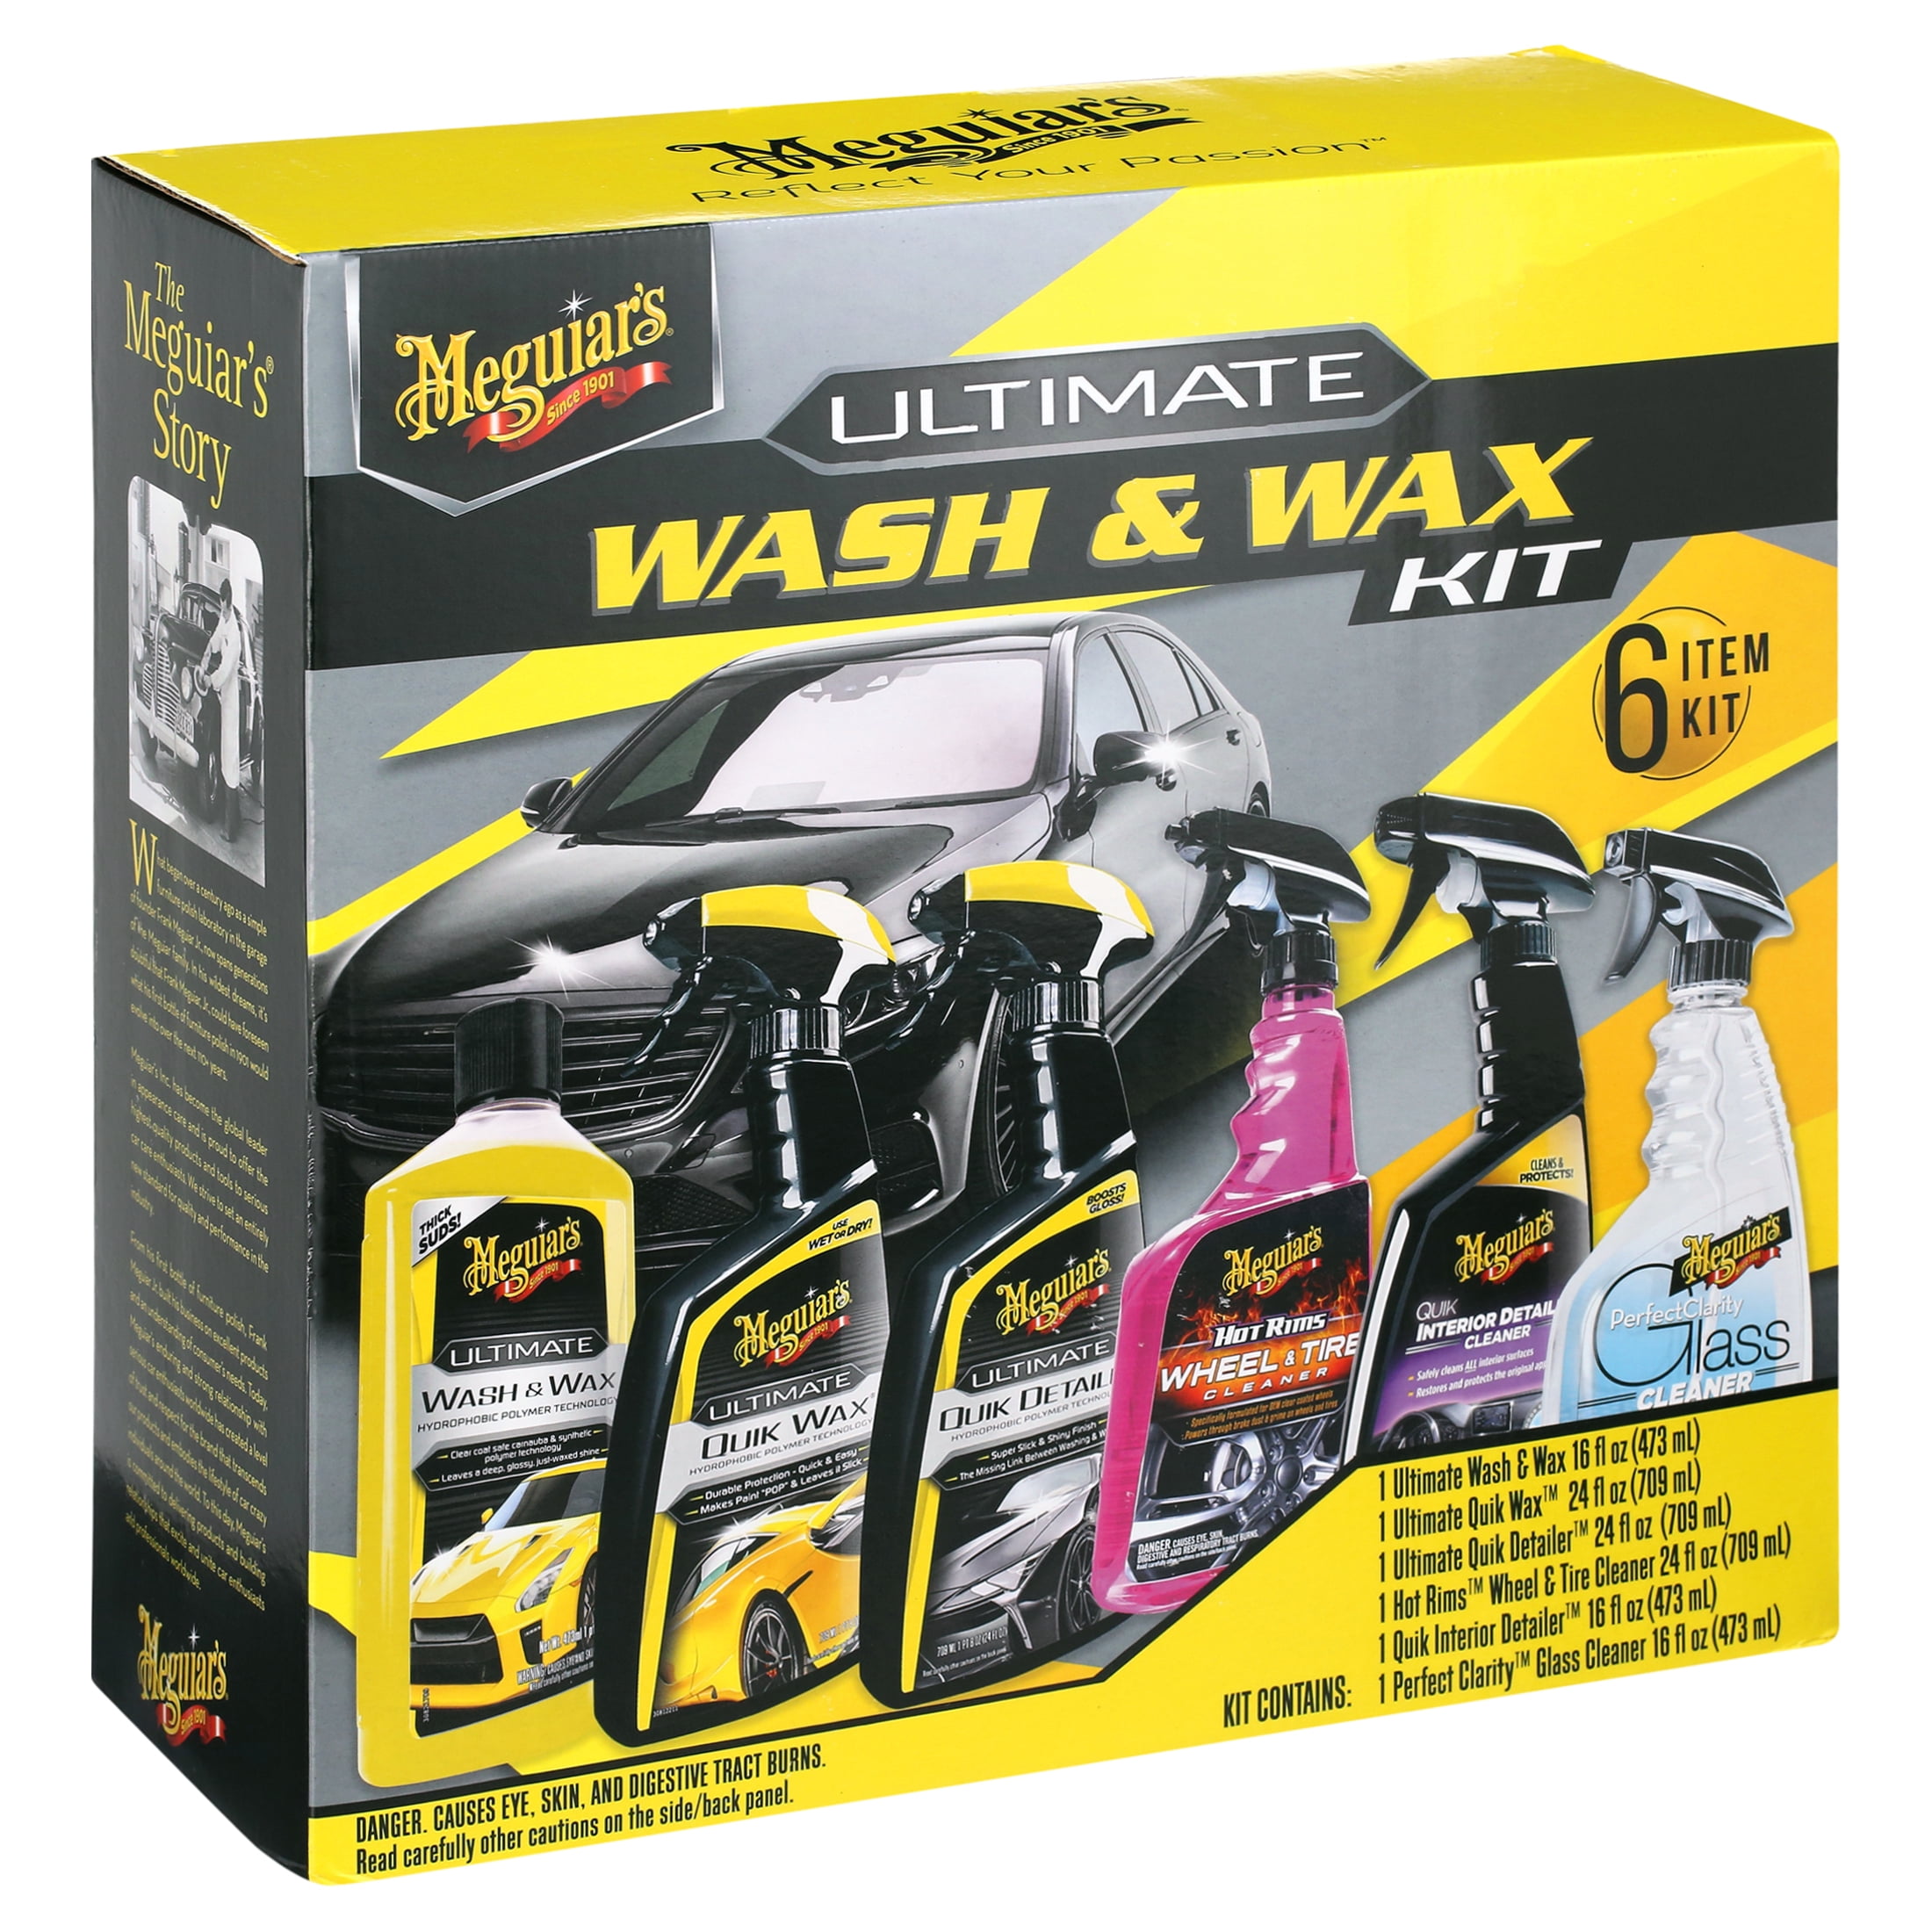 Meguiar's Classic Wash & Wax Kit, Car Cleaning Kit with Car Wash Soap and  Wax, Includes Other Car Cleaning Products Like Detail Spray, Interior